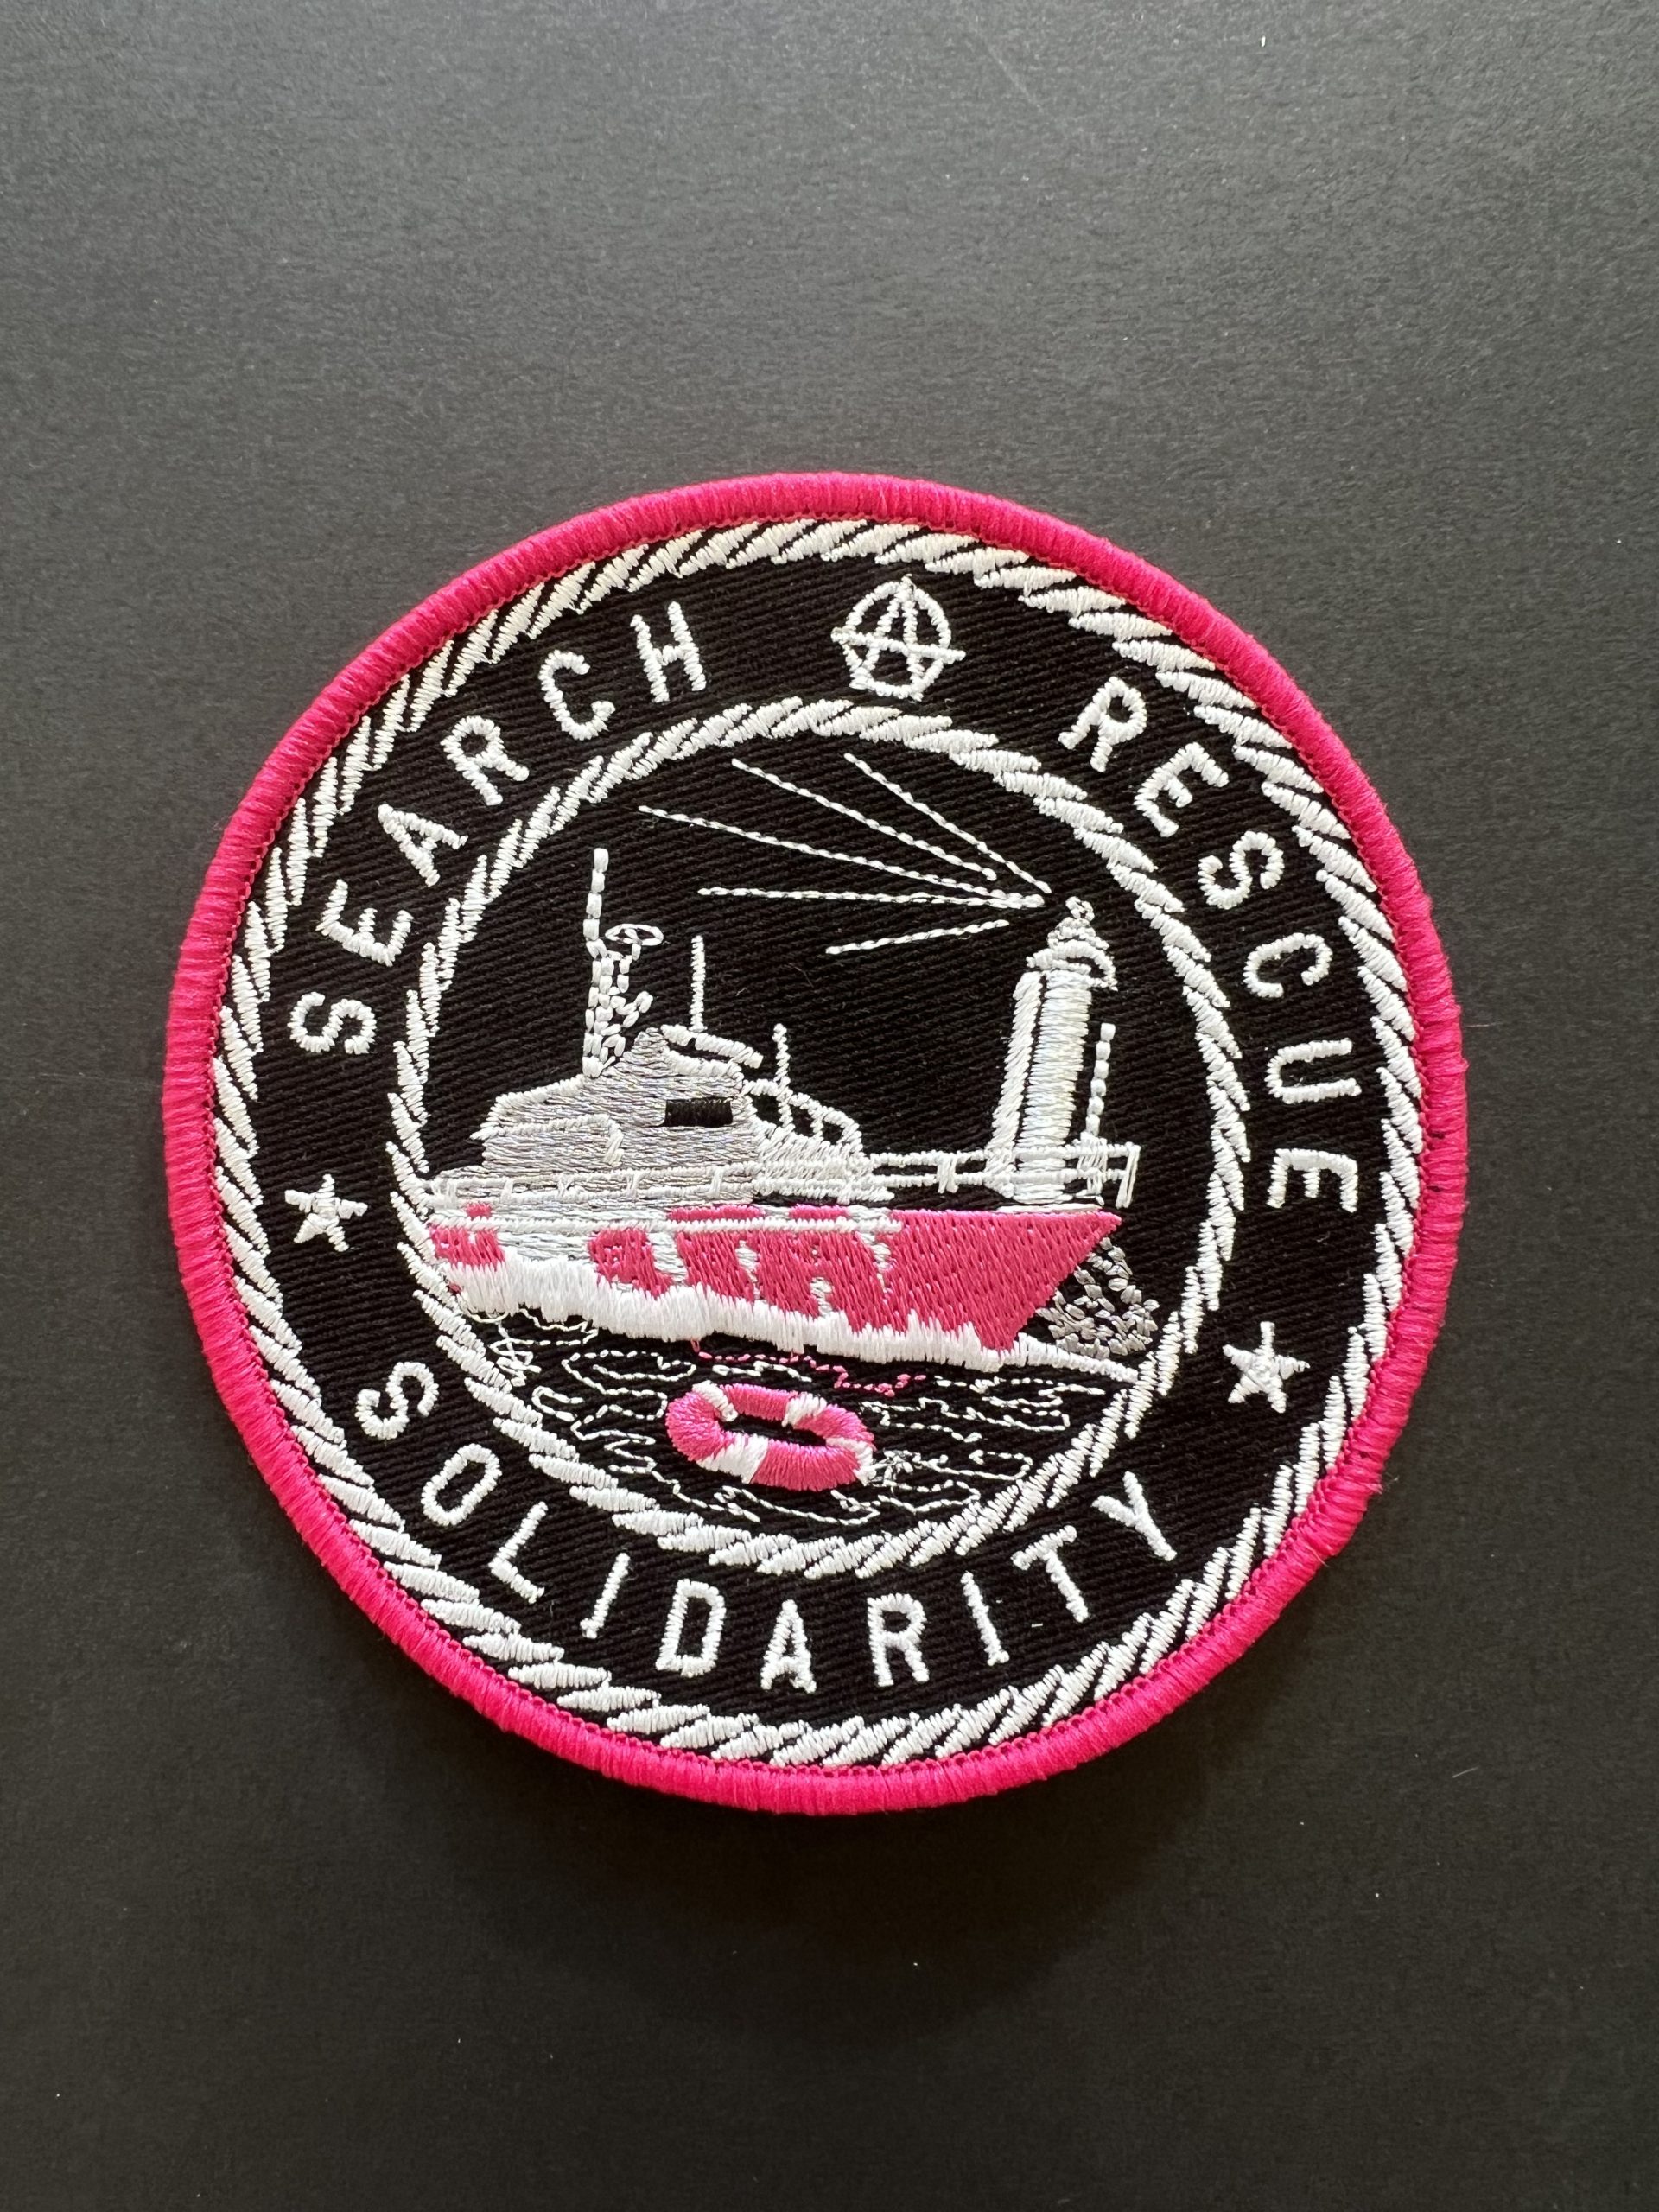 banksy solidarity patch louise michel